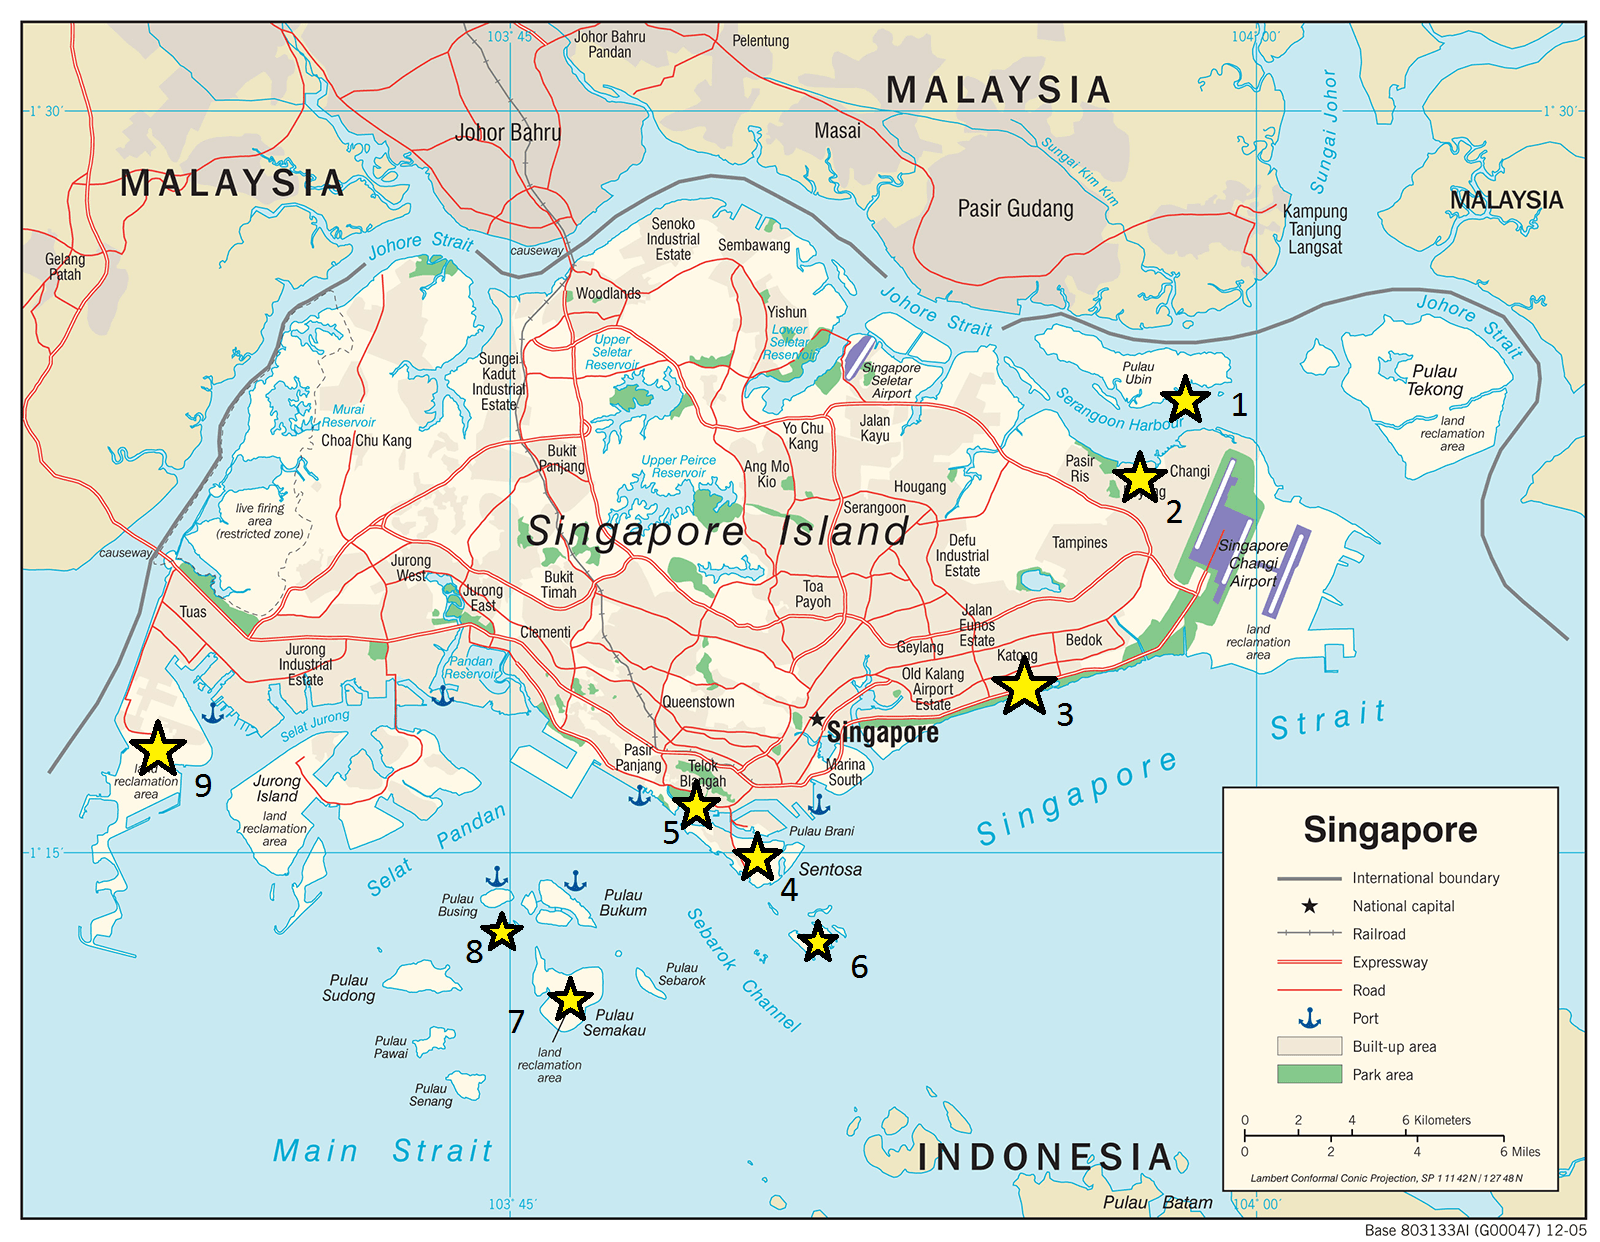 singapore_political_map edited again.png